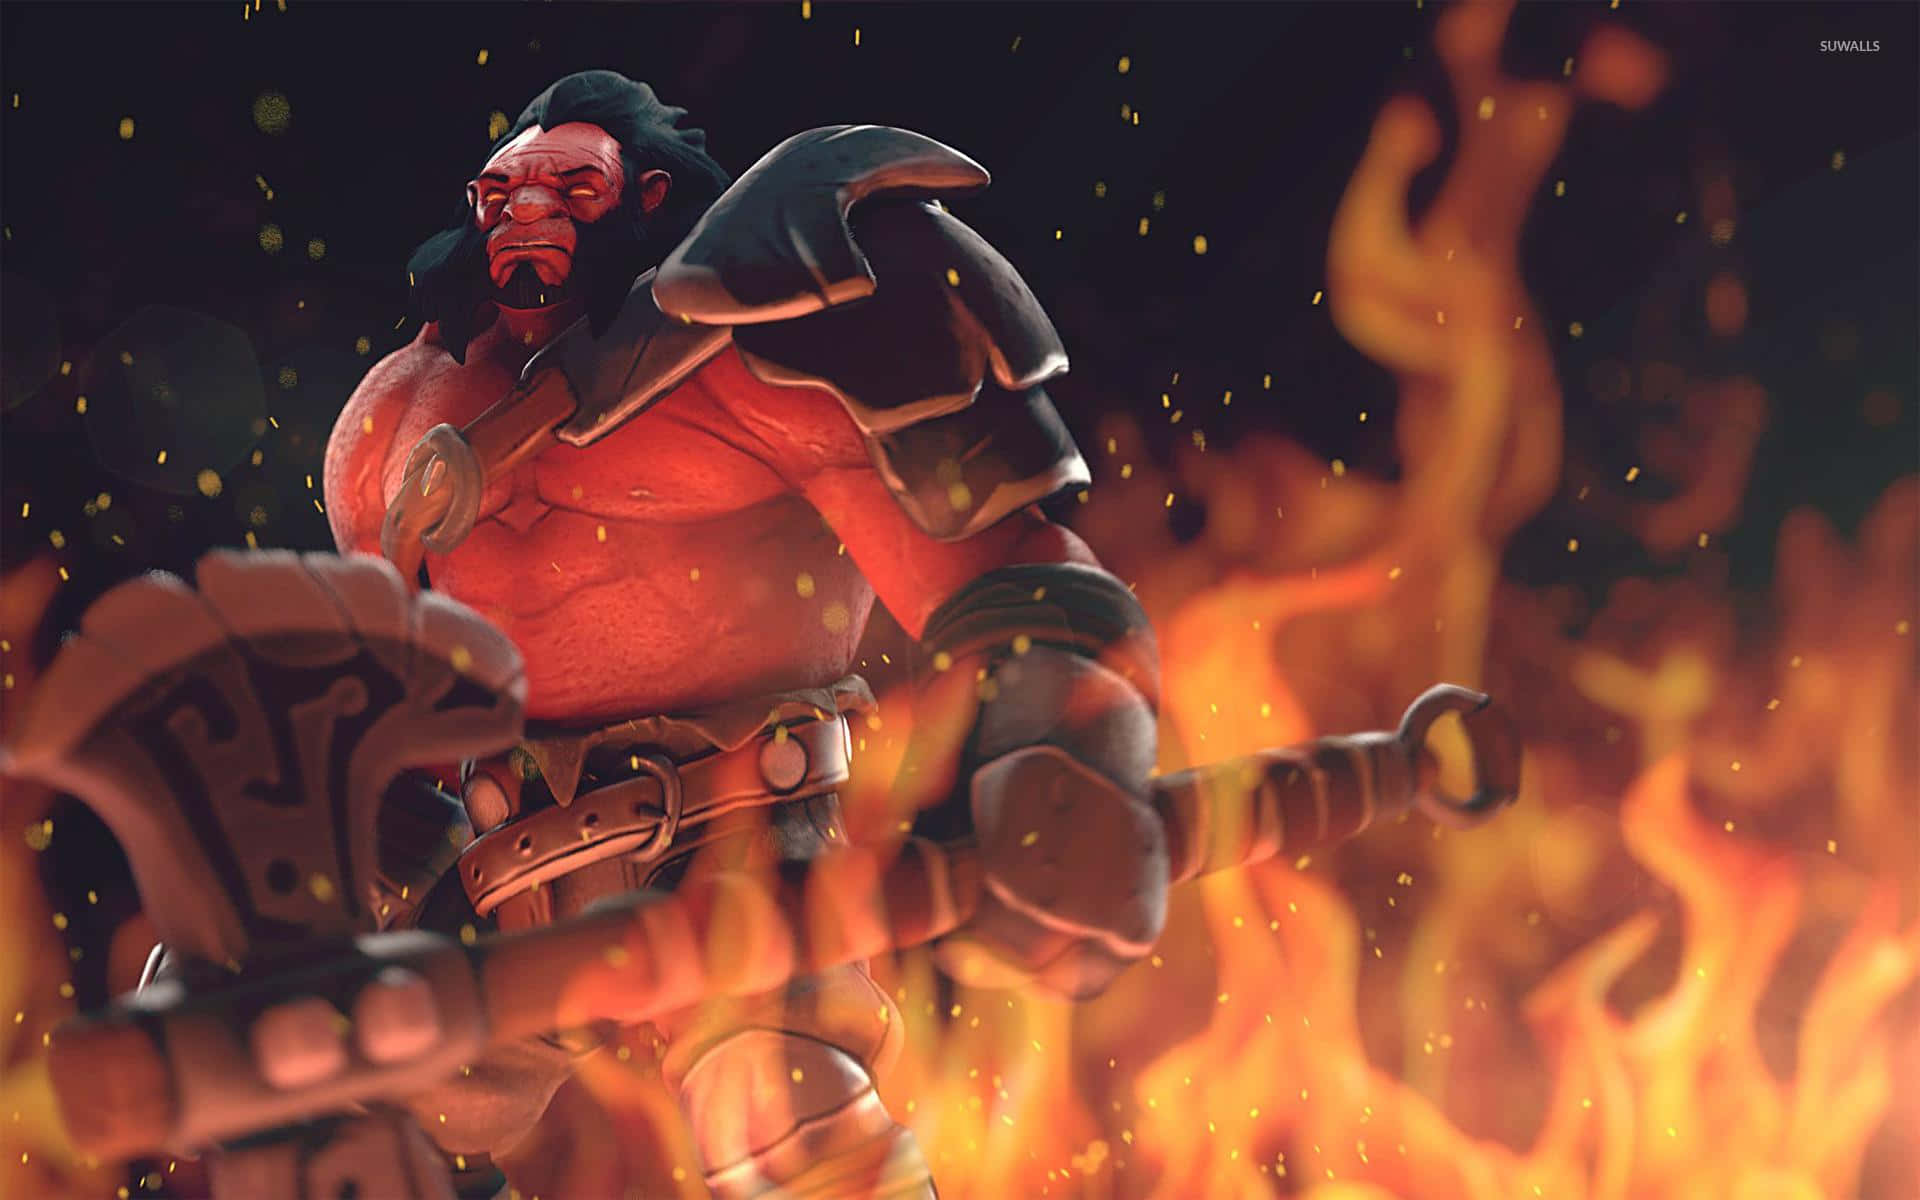 Image  Dota 2's Axe Champion Uses His Iconic Battle-Axe to Charge Into the Fray Wallpaper